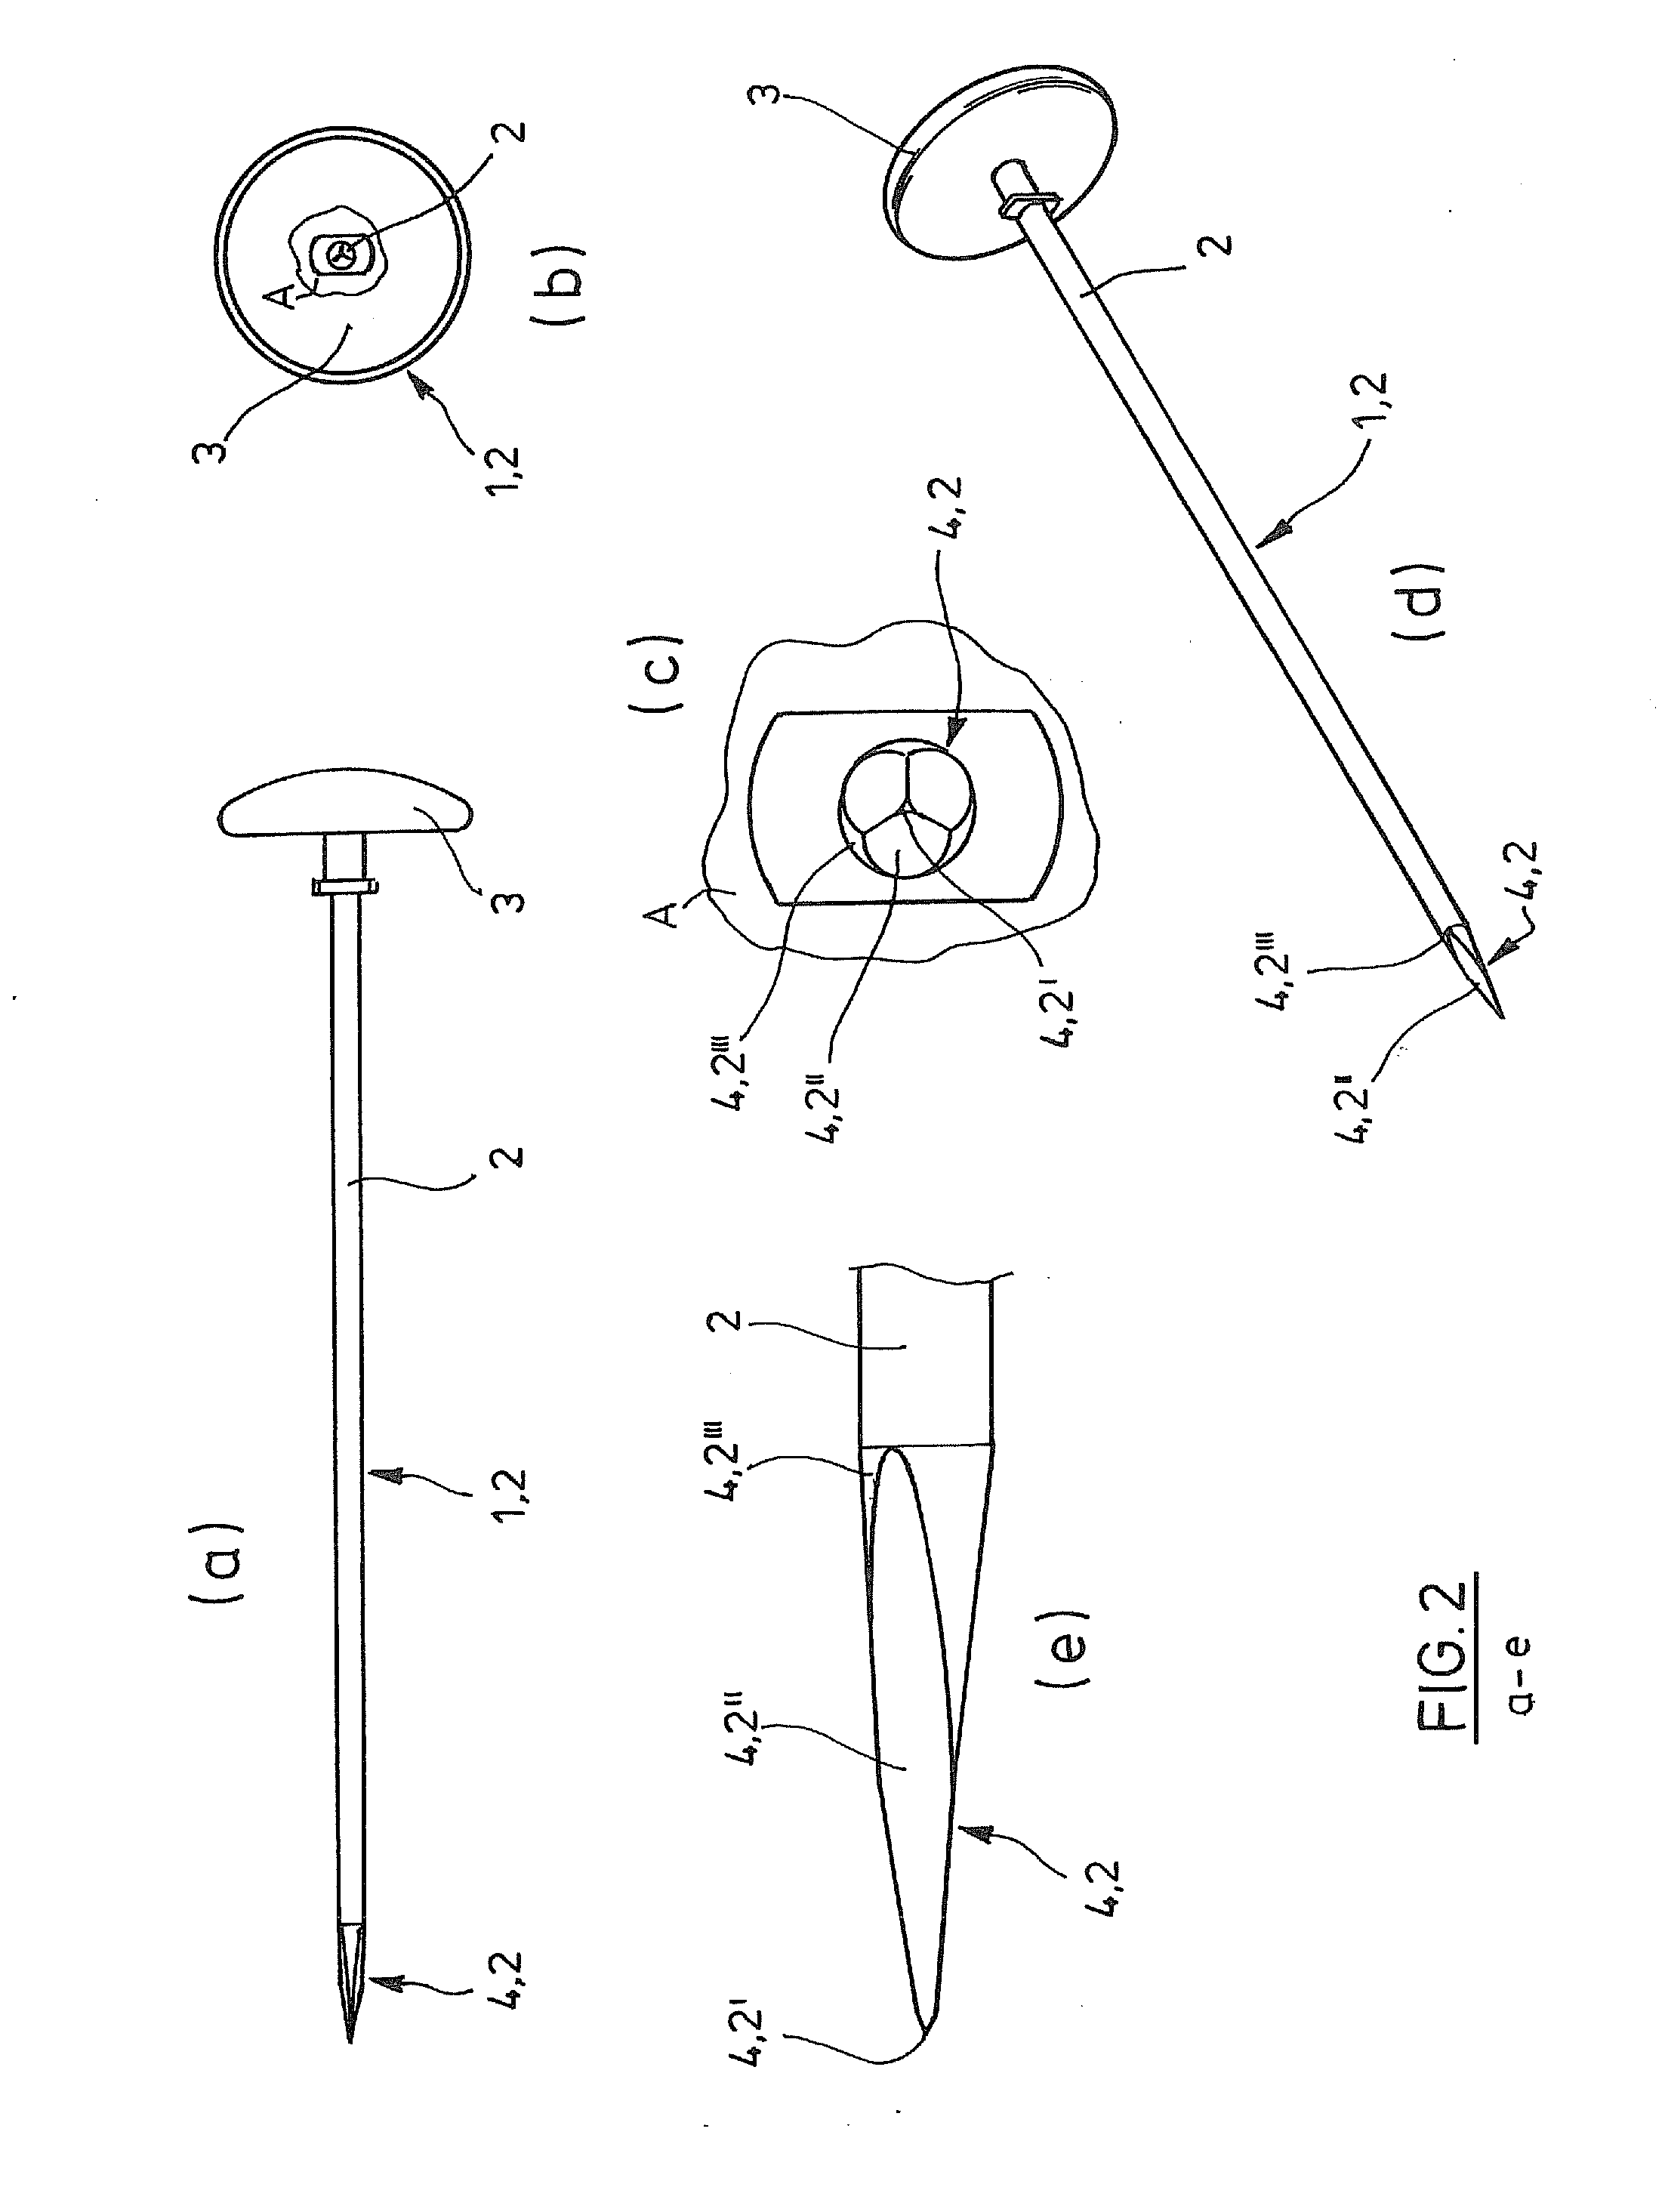 Kit for Providing an Artificial Stomach Entrance